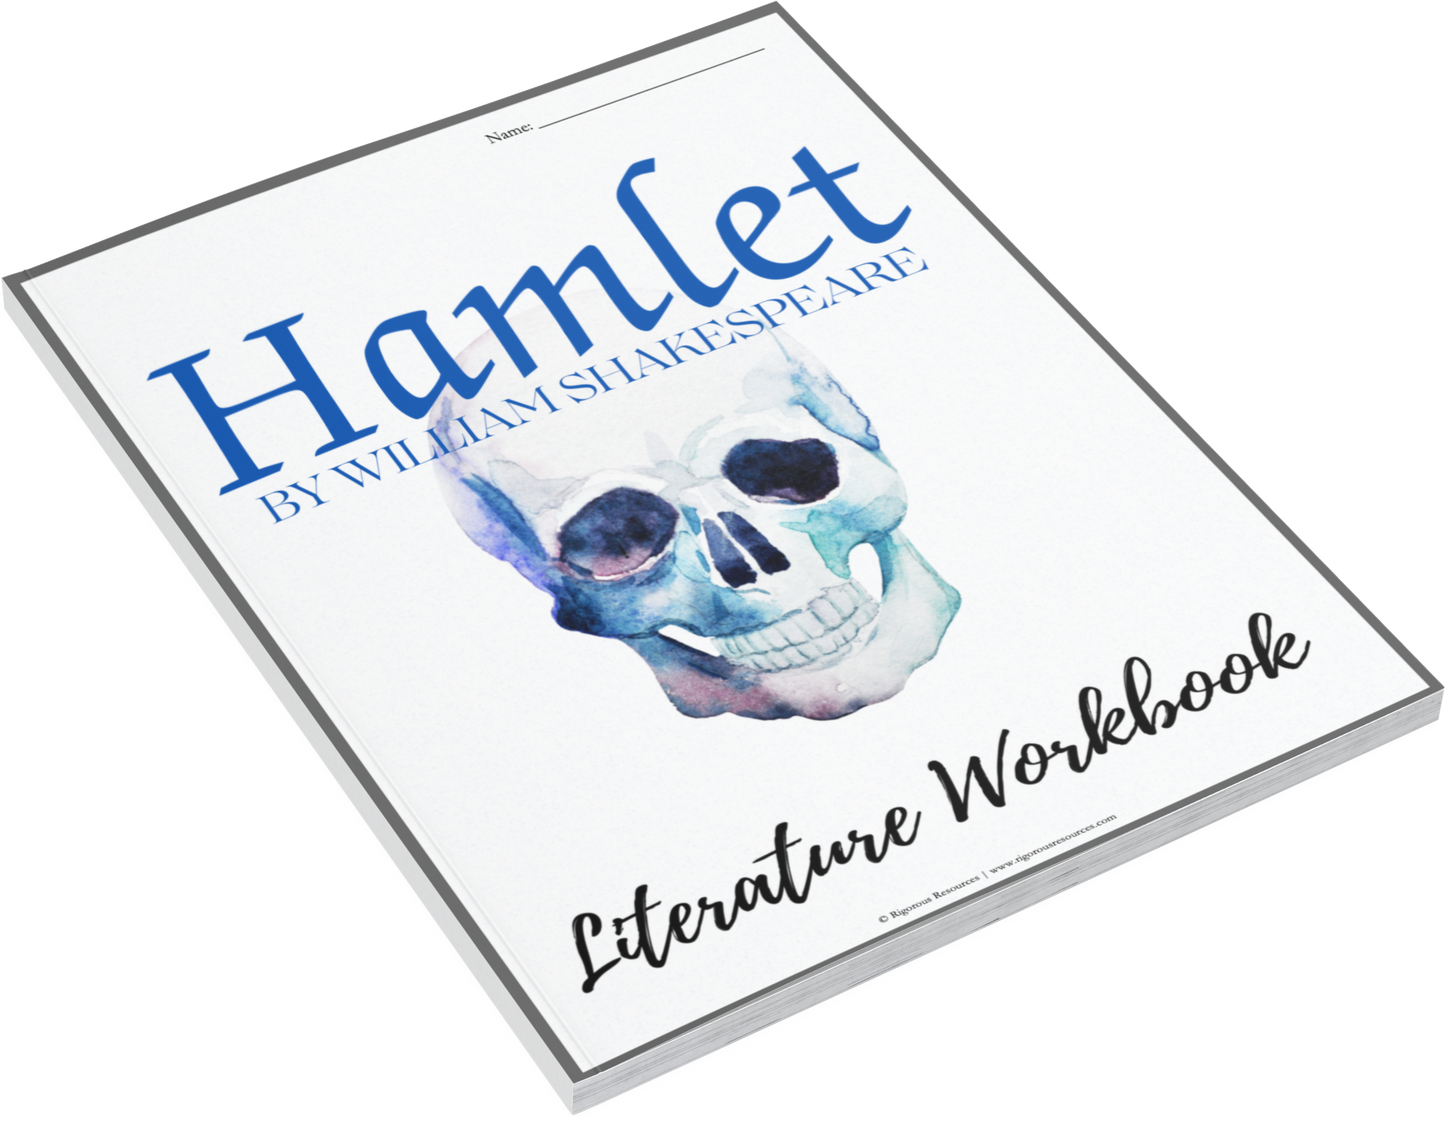 Hamlet | Complete Teaching Unit with Workbook & Answer Key